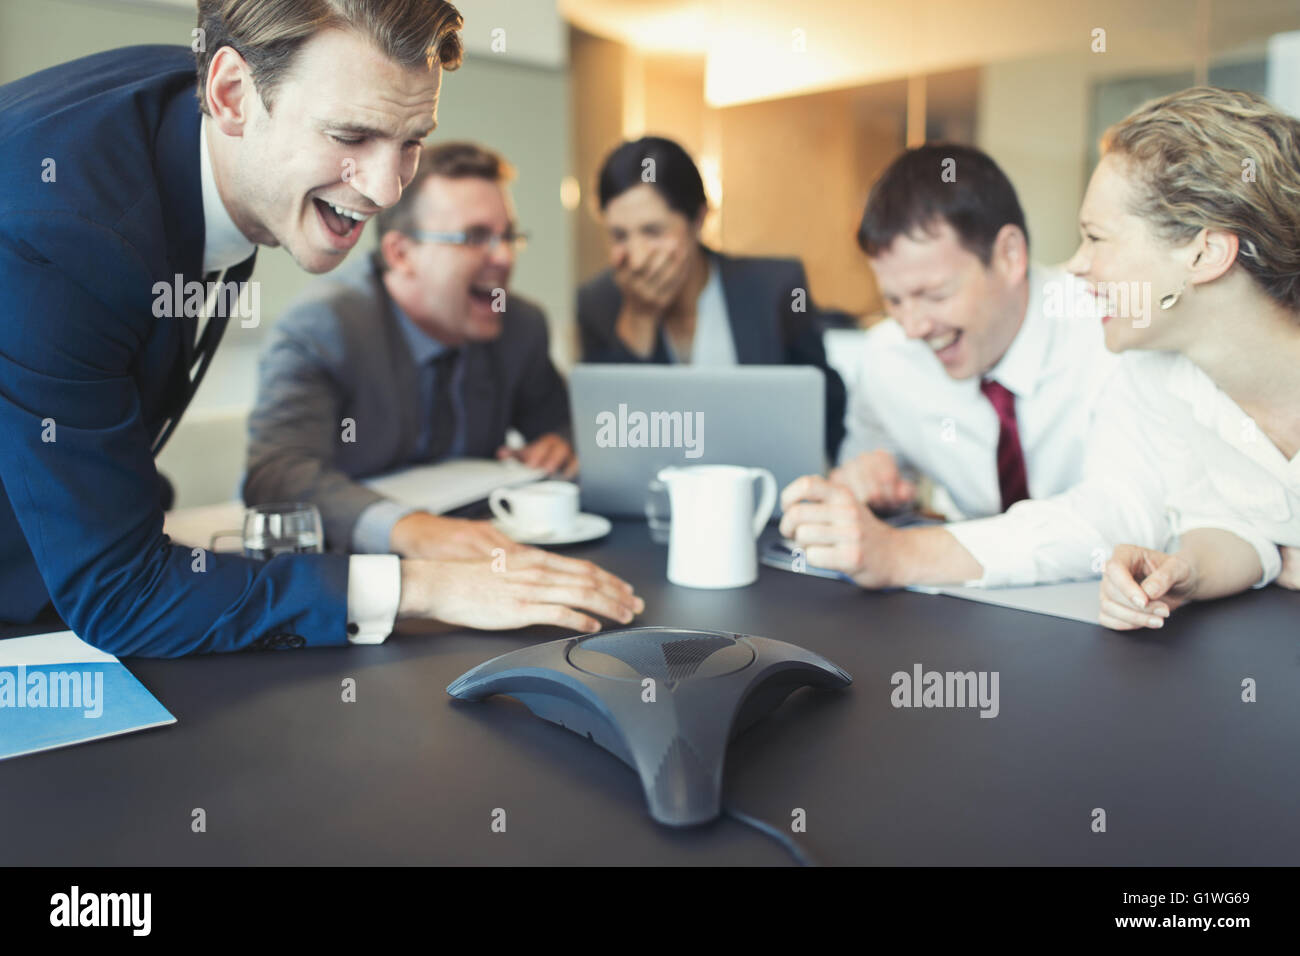 Laughing business people on conference call in conference room Stock Photo